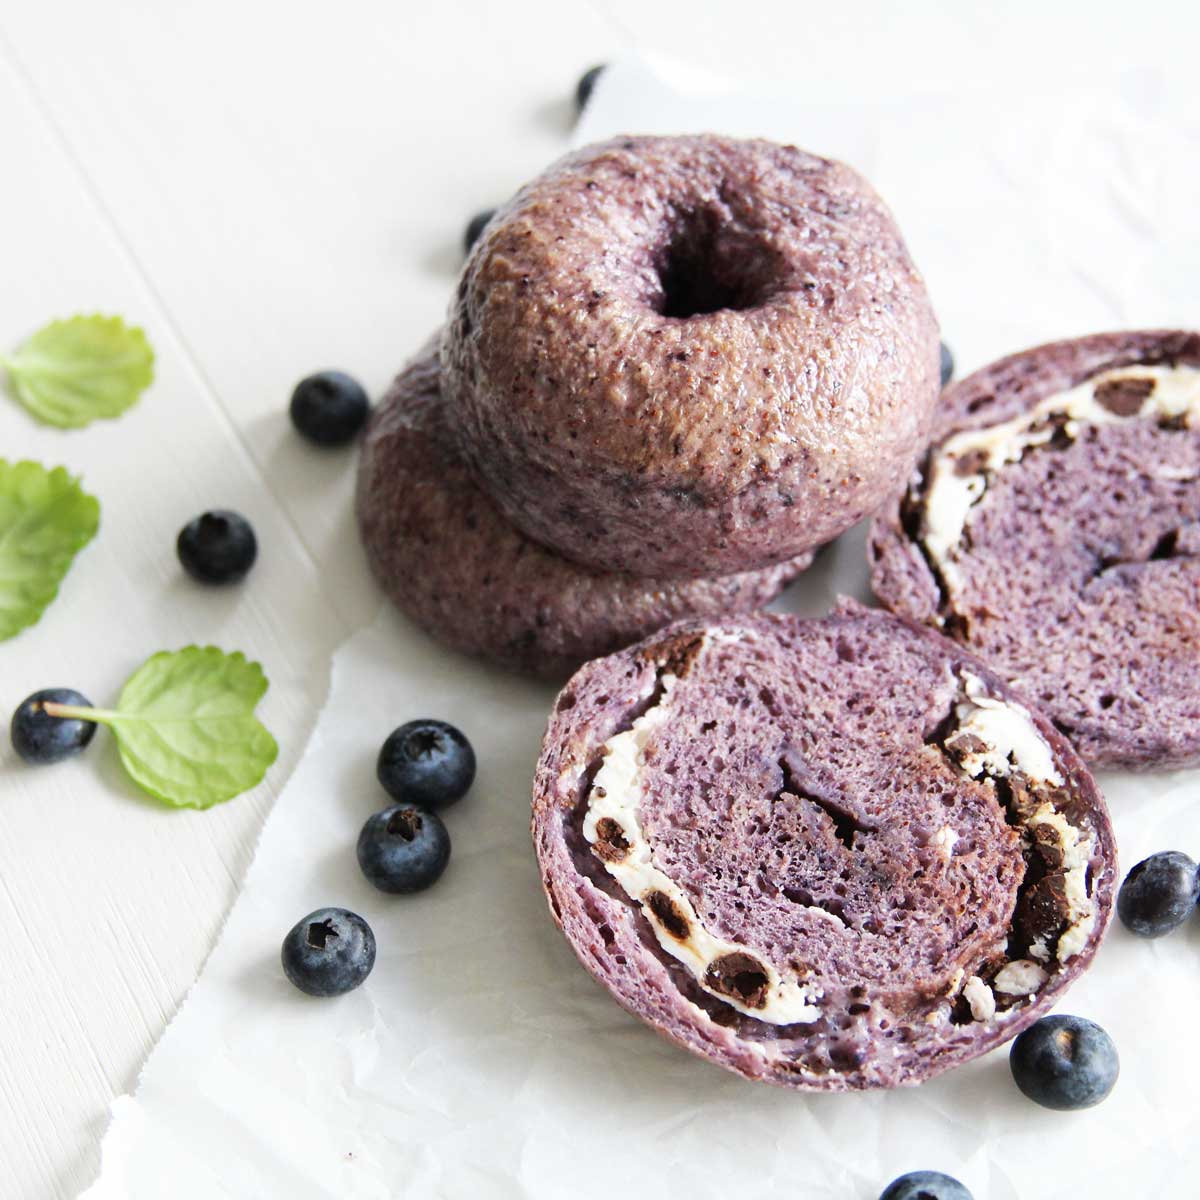 Chocolate Chip Blueberry Bagels (Easy, Cream Cheese Stuffed Bagel Recipe) - Peanut Butter Banana Bread